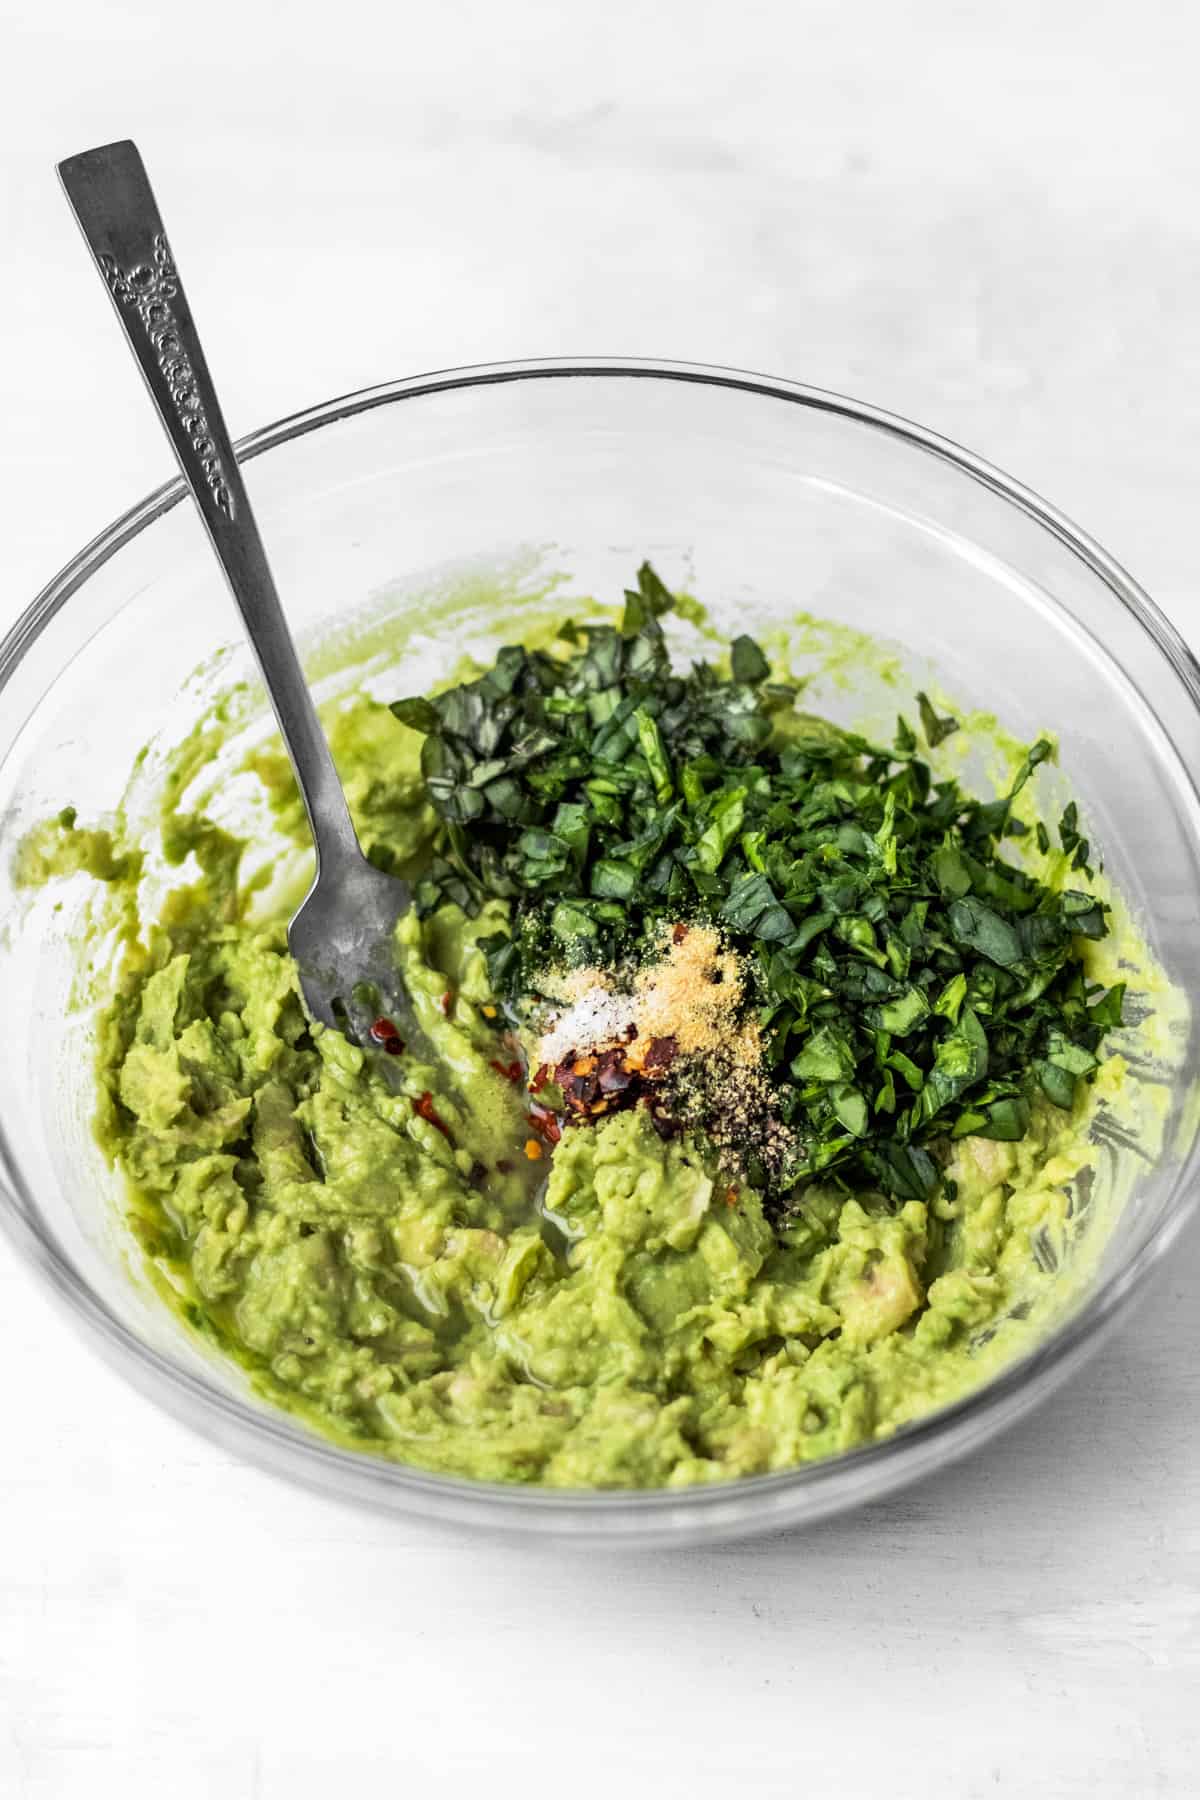 Adding fresh herbs and spices to the mashed beans and avocado. 